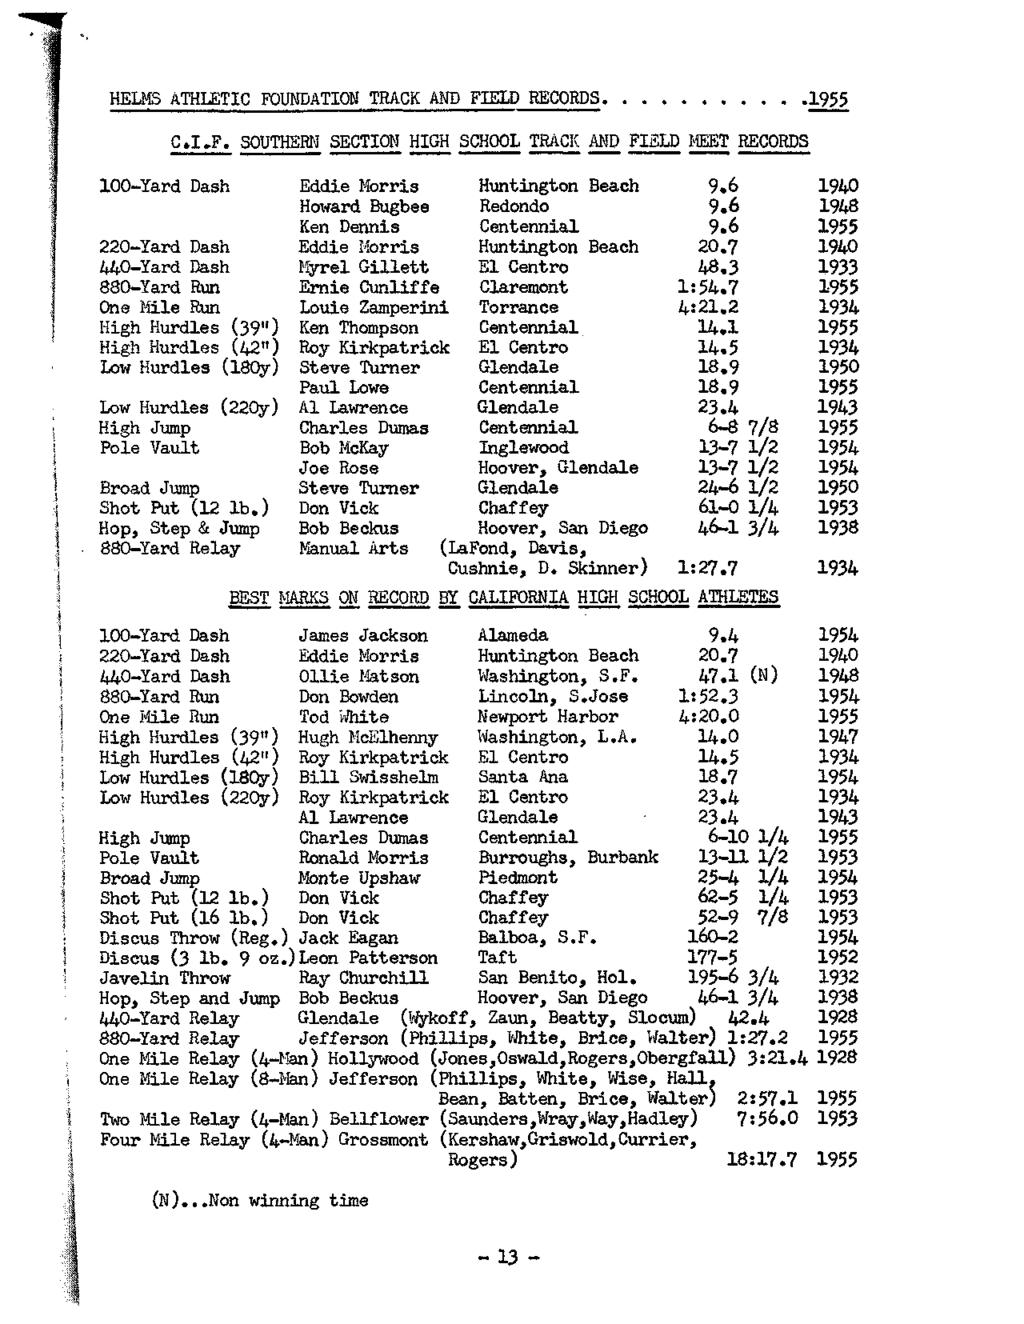 HELMS ATHLETIC FOUNDATION TRACK AMD FIELD RECORDS 1955 C*I>F. SOUTHERN SECTION HIGH SCHOOL TRACK AND FIELD MEET RECORDS 100-Yard Dash Eddie Morris Huntington Beach 9.6 1940 Howard Bugbee Redondo 9.